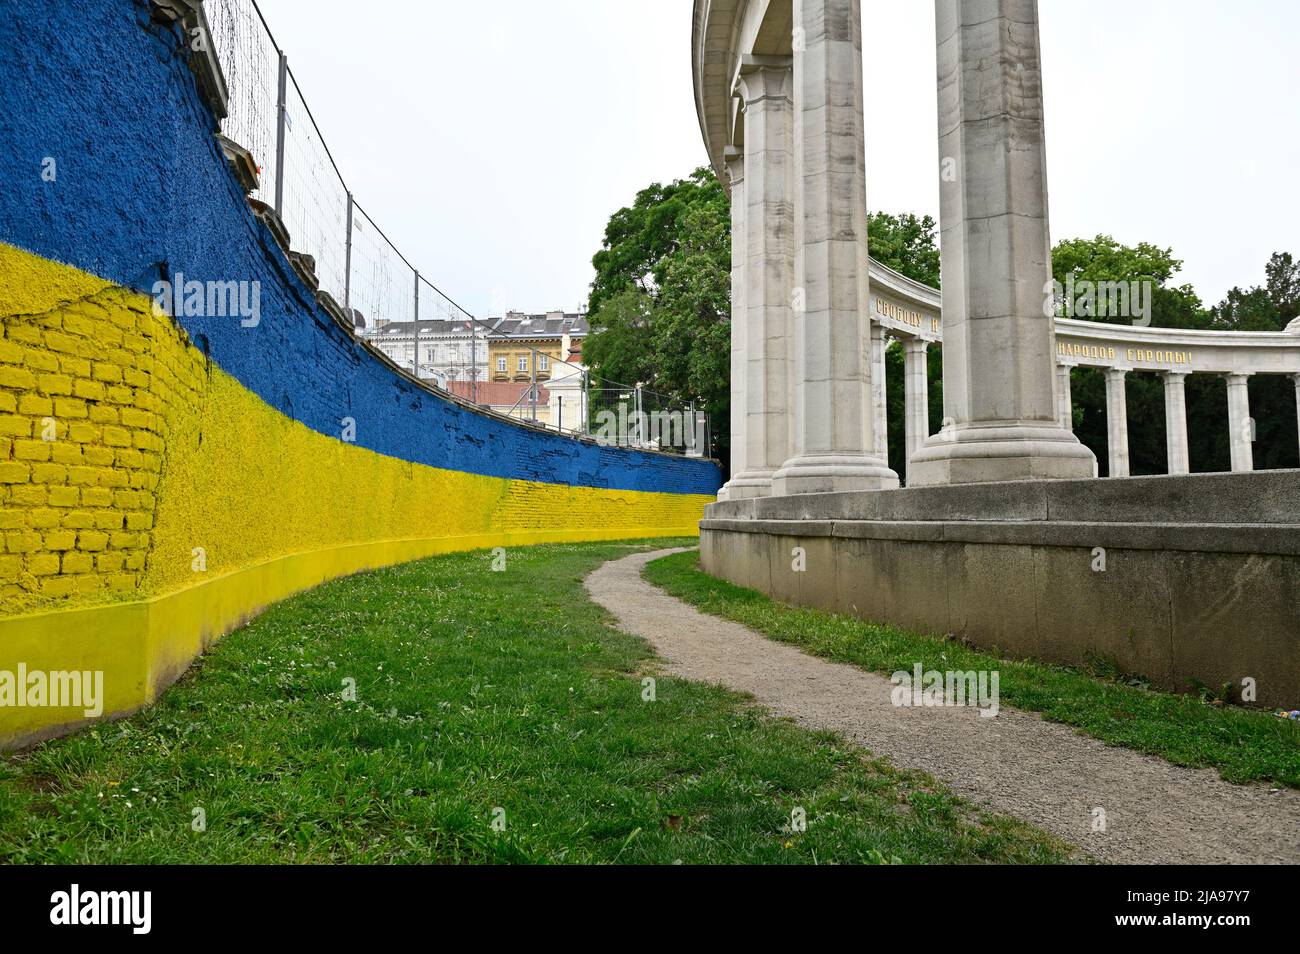 Vienna, Austria. Heroes' Monument on Schwarzenbergplatz with the 'brick wall' in the background in the Ukrainian national colors of blue and yellow Stock Photo